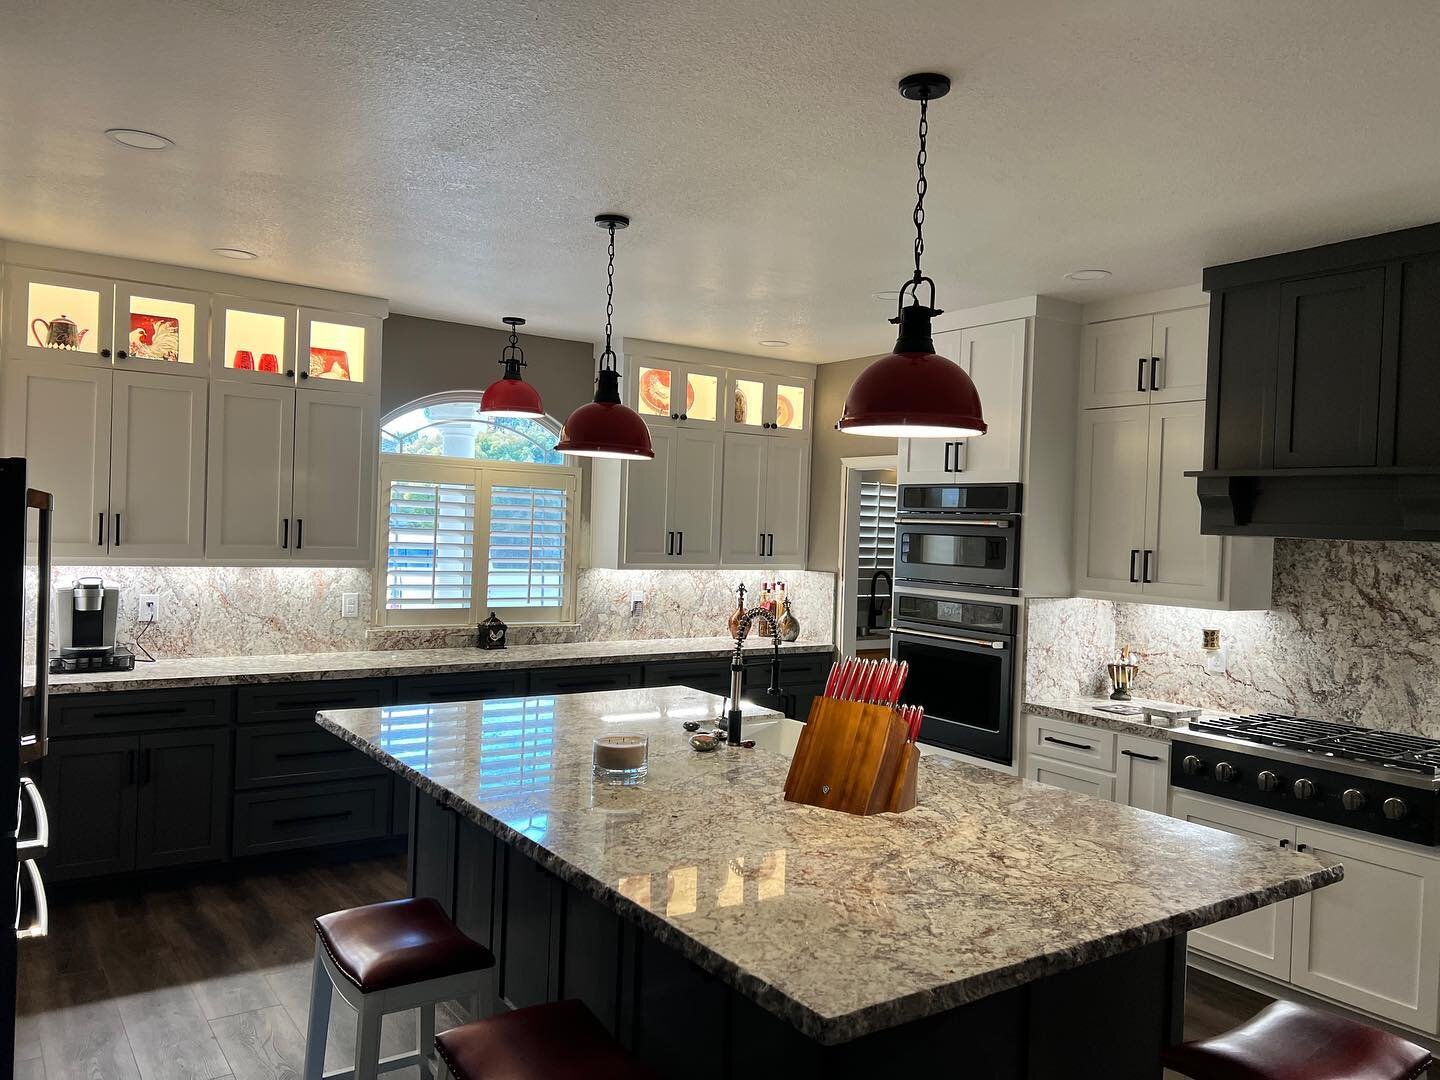 kitchen remodel finished right before the holidays! 🧑&zwj;🍳🛠️ call or text 831-265-9696 to get a free quote on whatever you need. 📞🚧
Swipe to see the before.
&bull;
&bull;
&bull;
#jgbuilt #jgbuilder #hollisterca #sanbenitocounty #kitchenremodel 